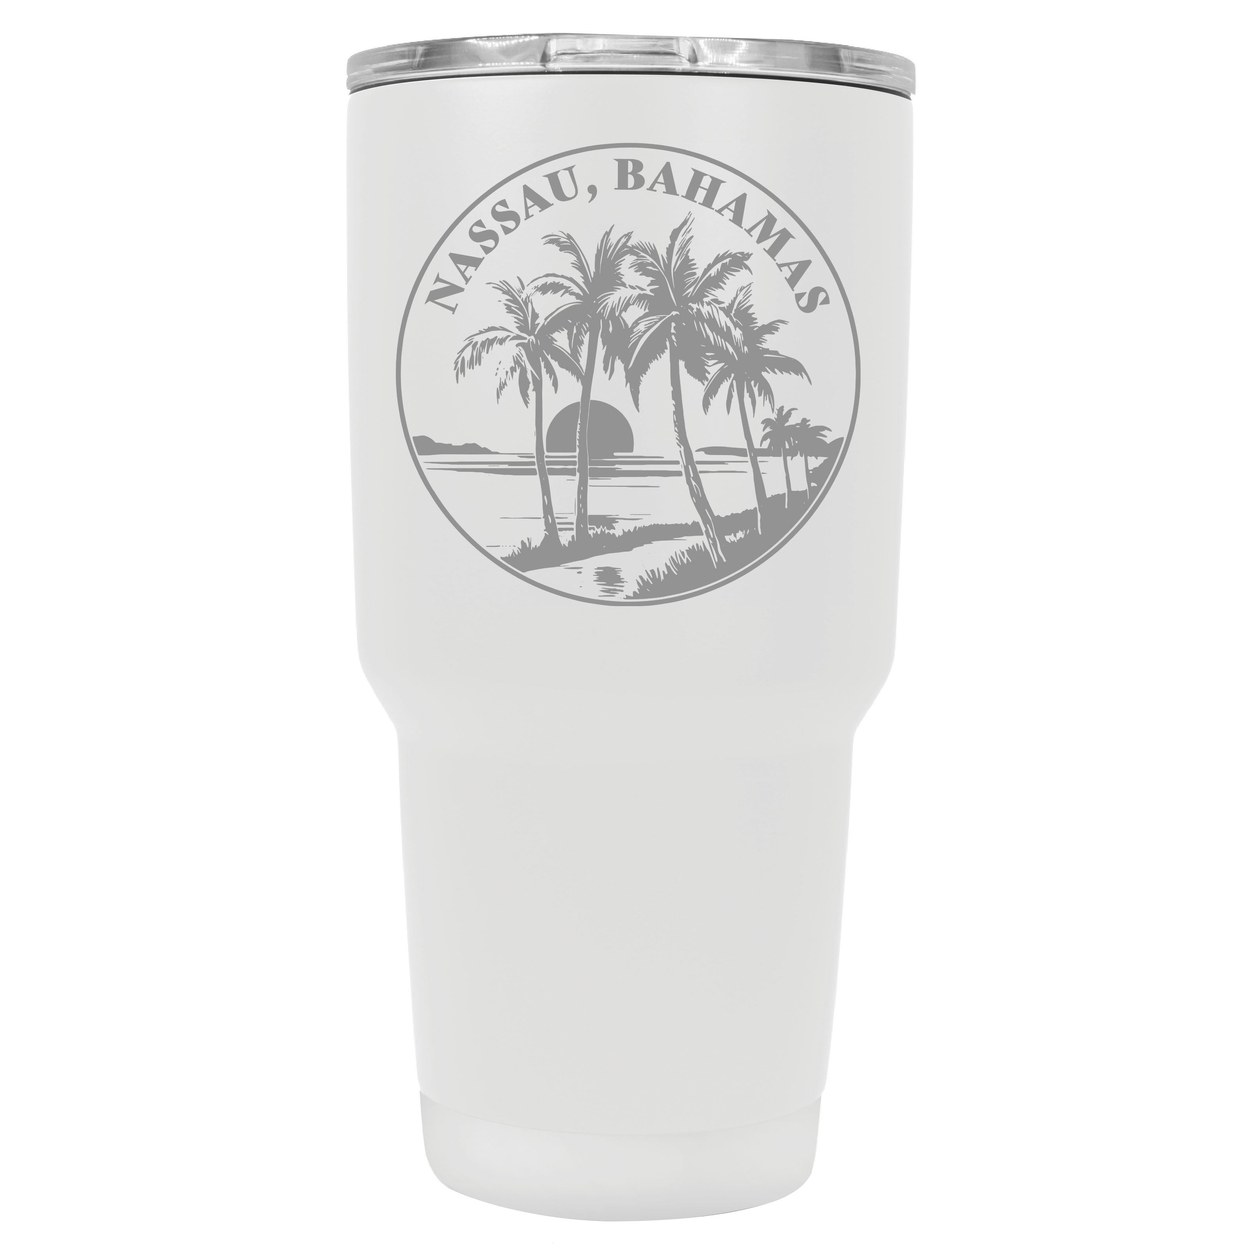 Nassau The Bahamas Souvenir 24 Oz Engraved Insulated Stainless Steel Tumbler - White,,2-Pack